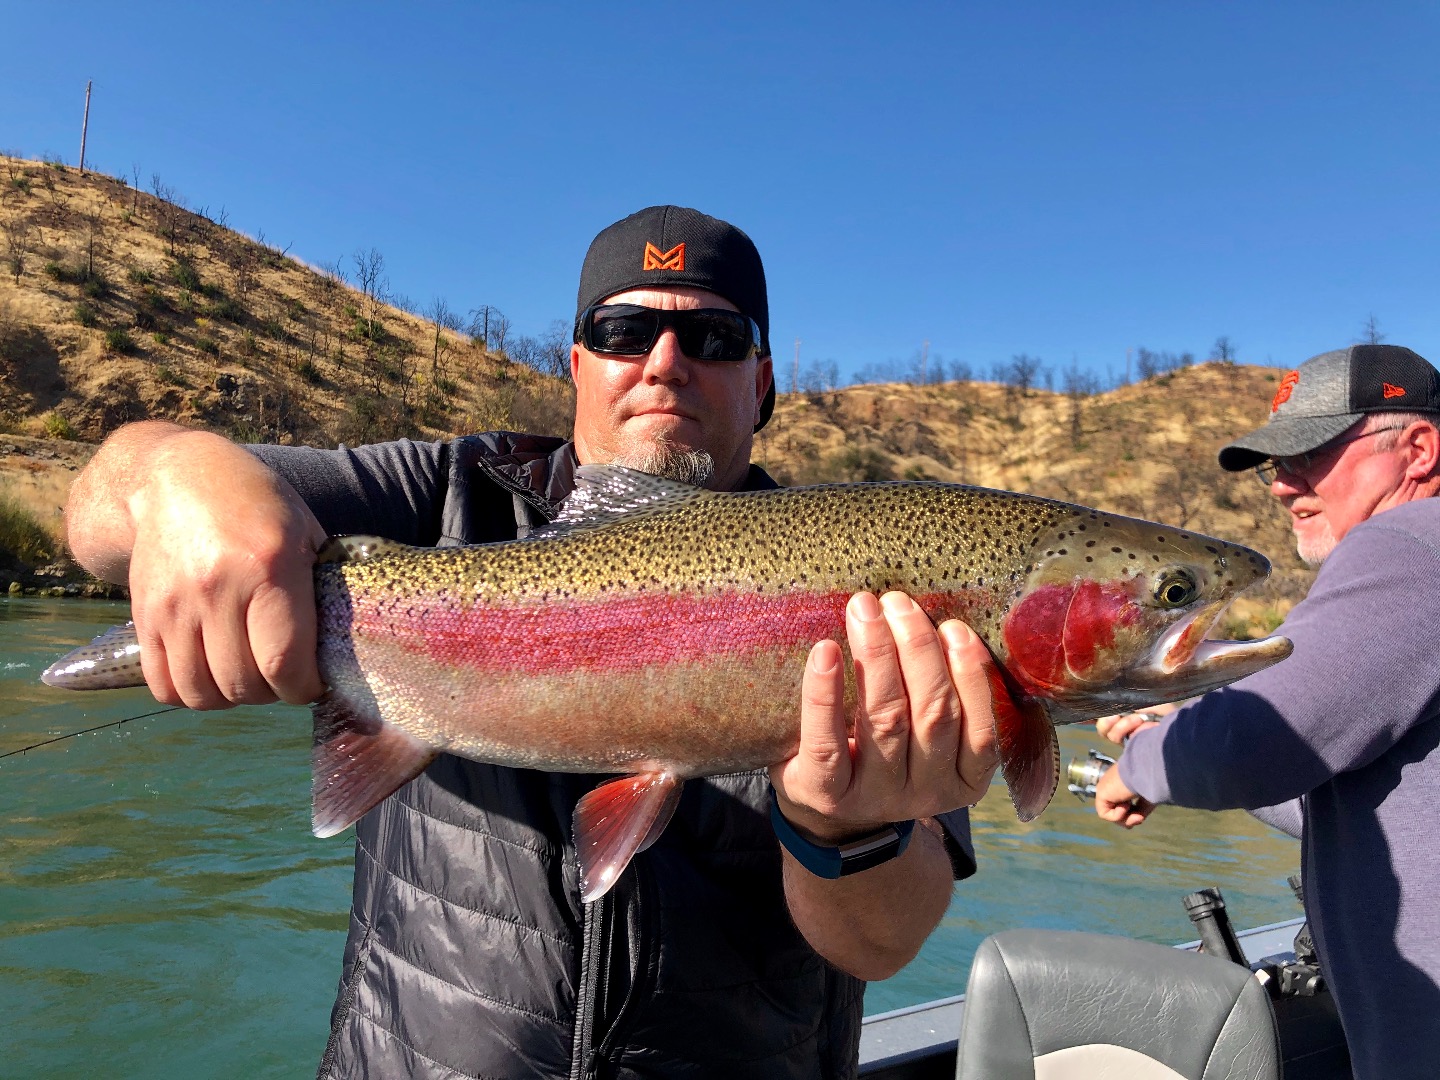 Sac River trout grounds loaded with steelhead/trout